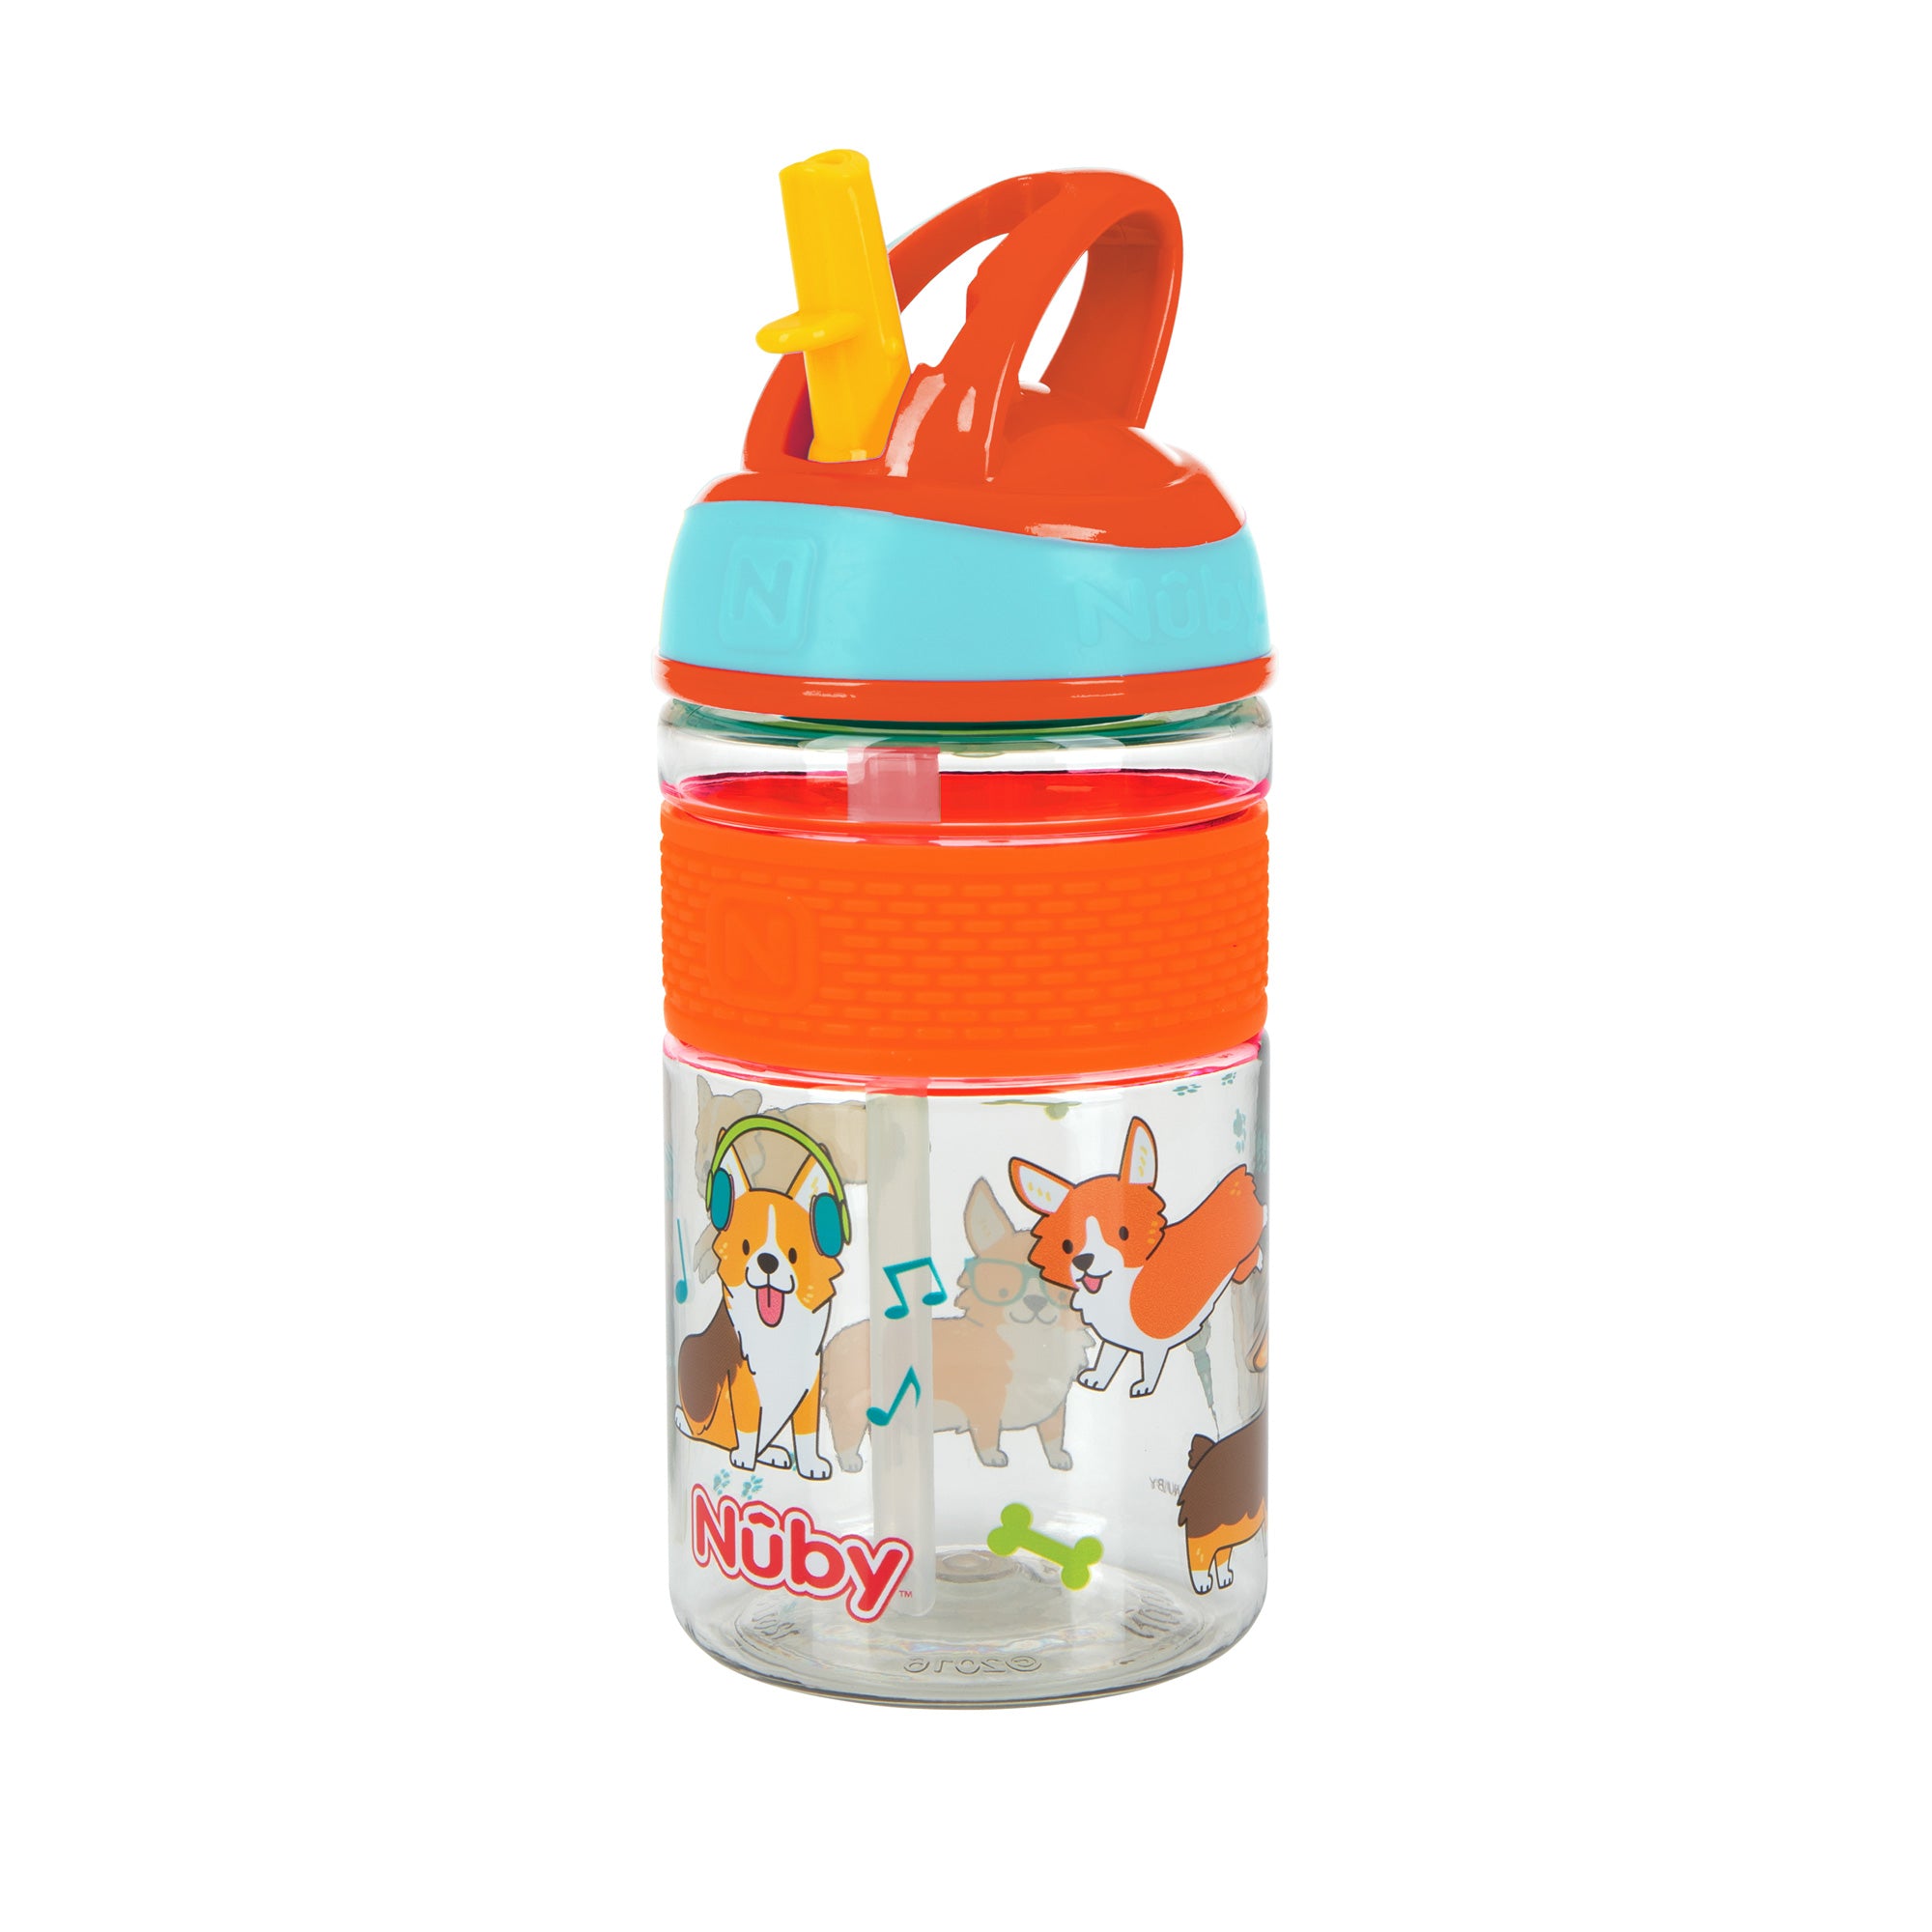 What Age Should a Child Drink from an Open Cup? – Nuby